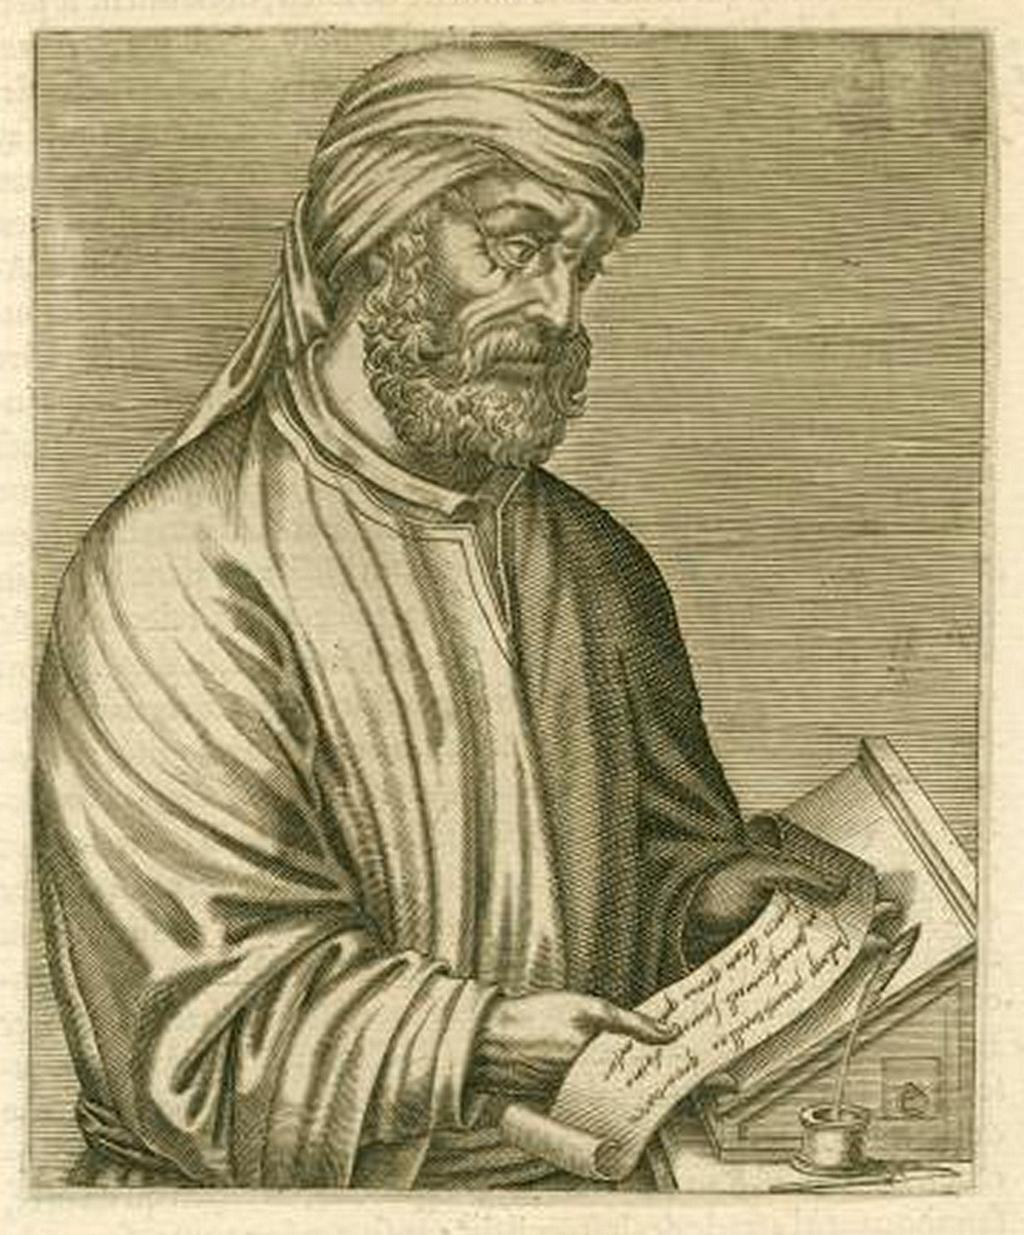 Tertullian was schooled in the knowledge of both Rome and Greece and was thought to be in the practice of law.